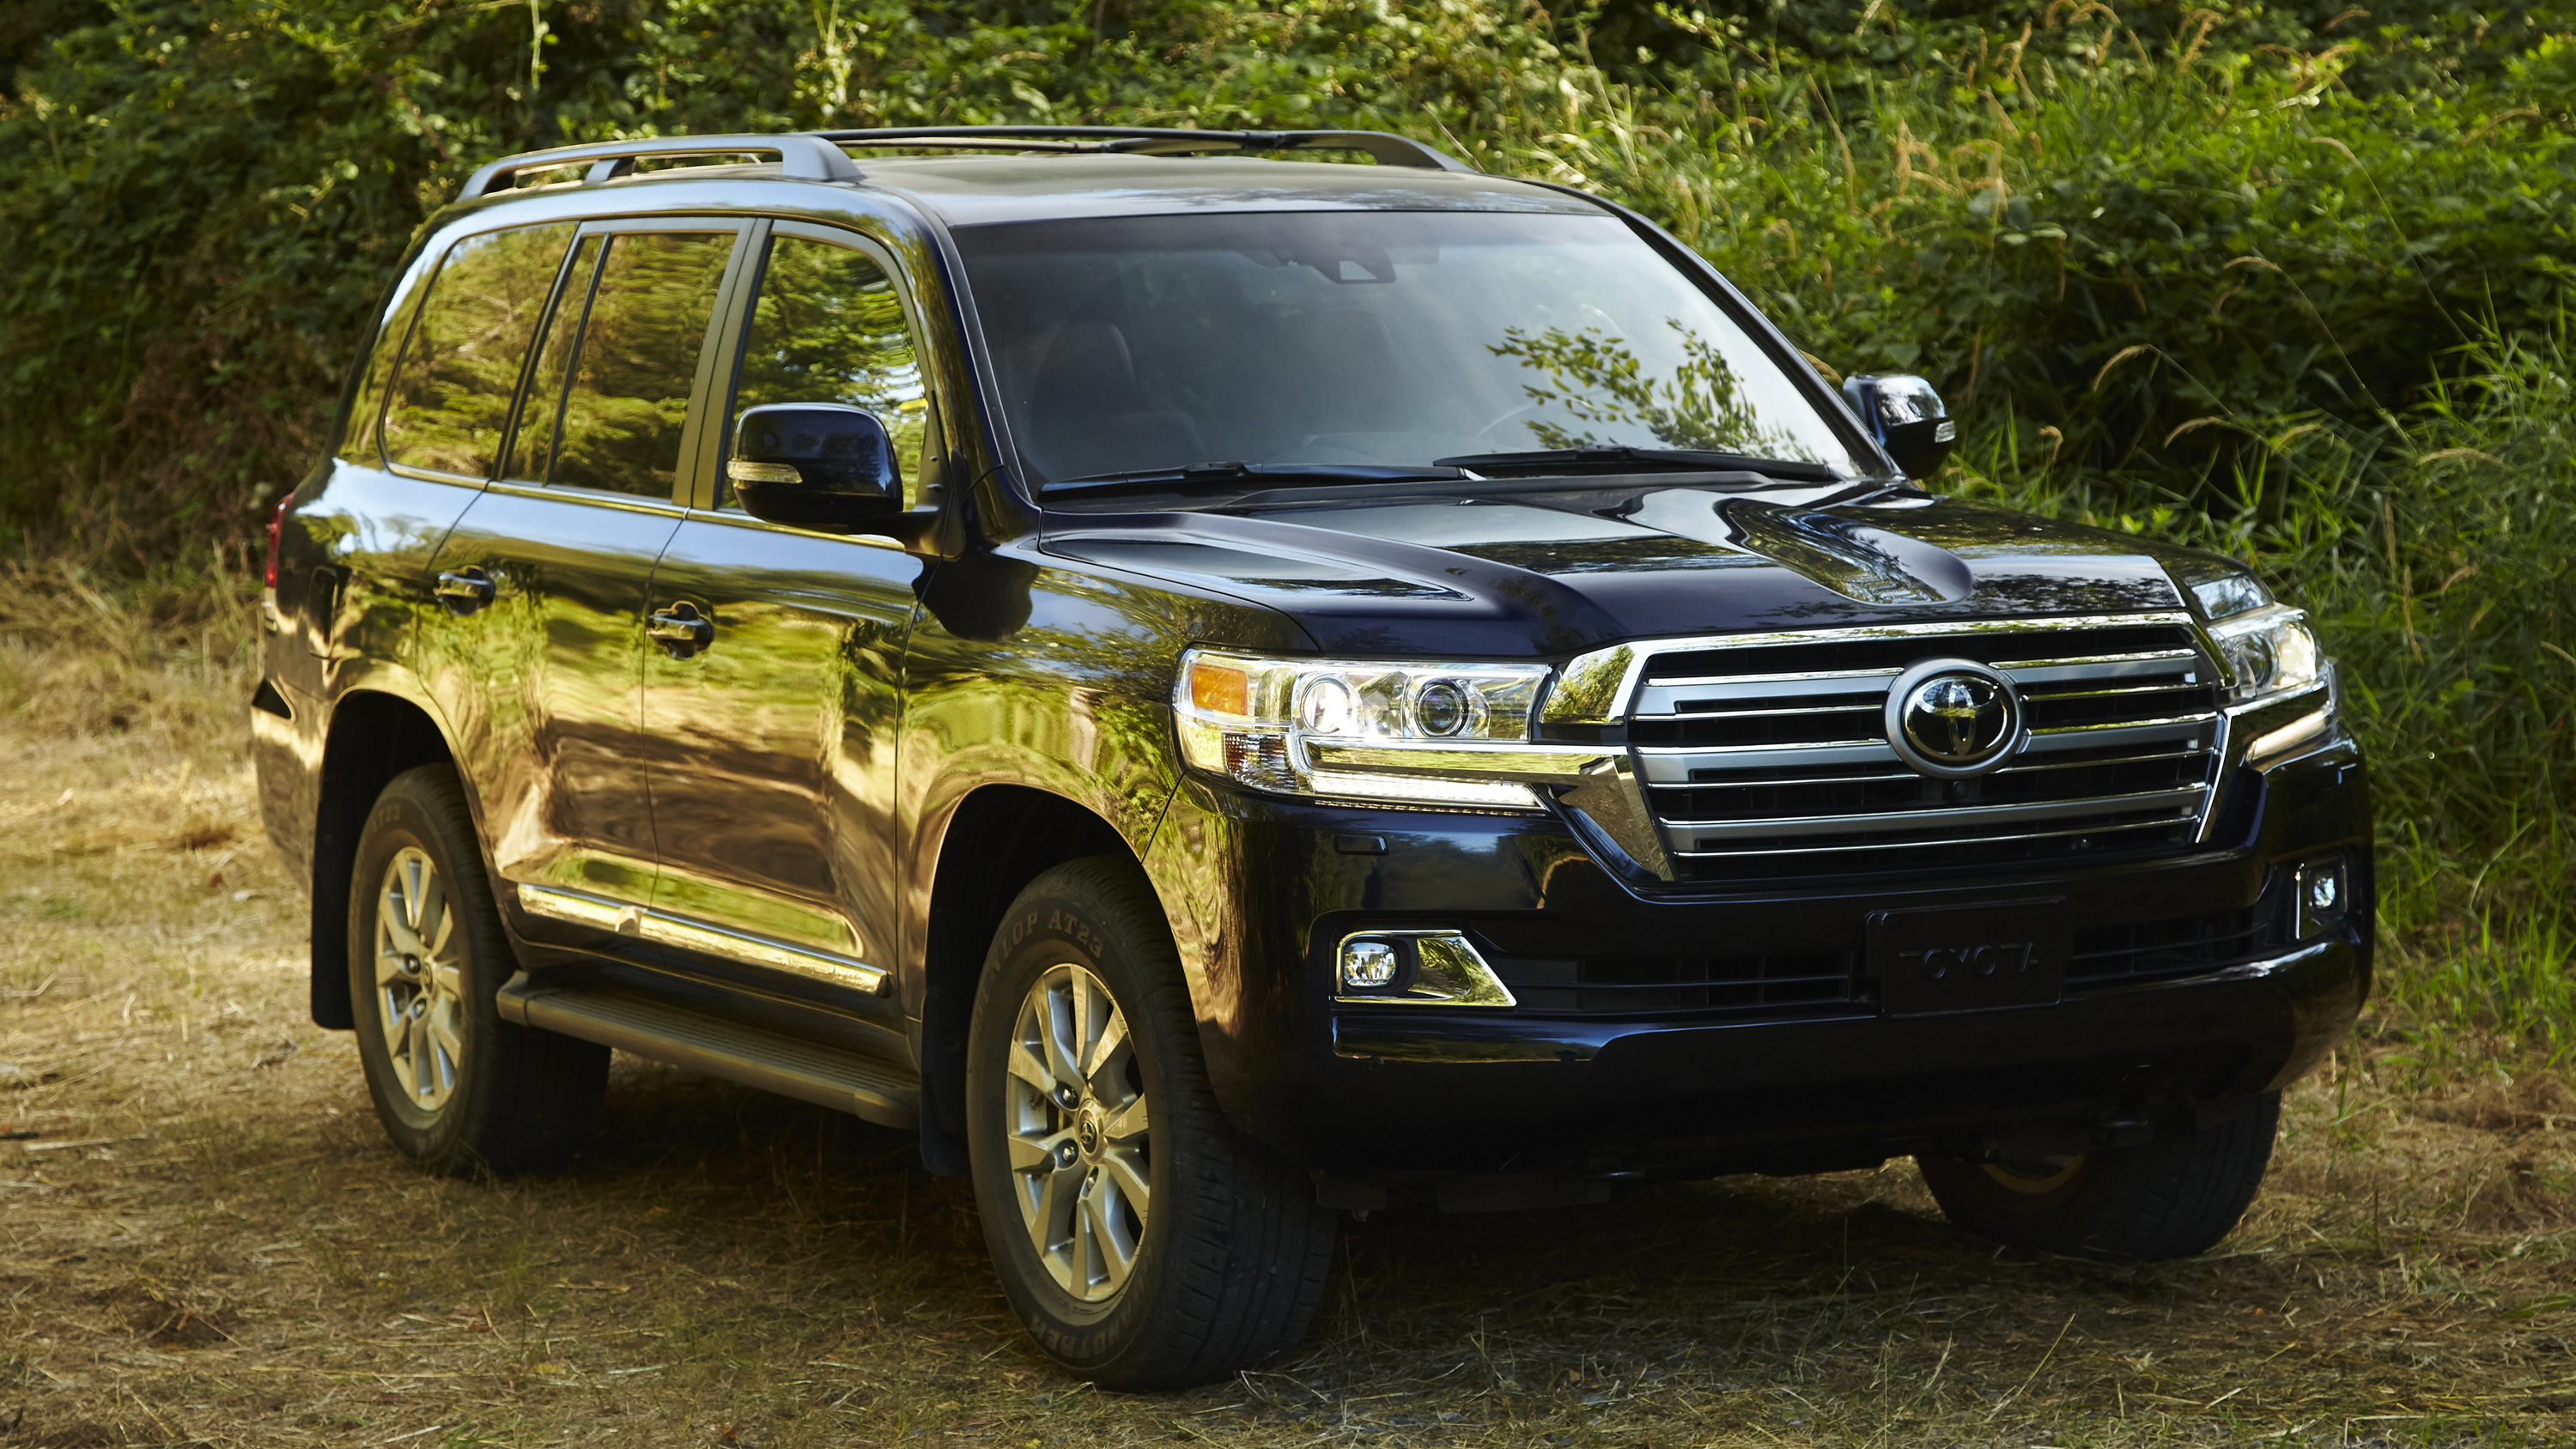 Toyota Land Cruiser Pictures, Photos, Wallpapers - New Toyota Land Cruiser , HD Wallpaper & Backgrounds